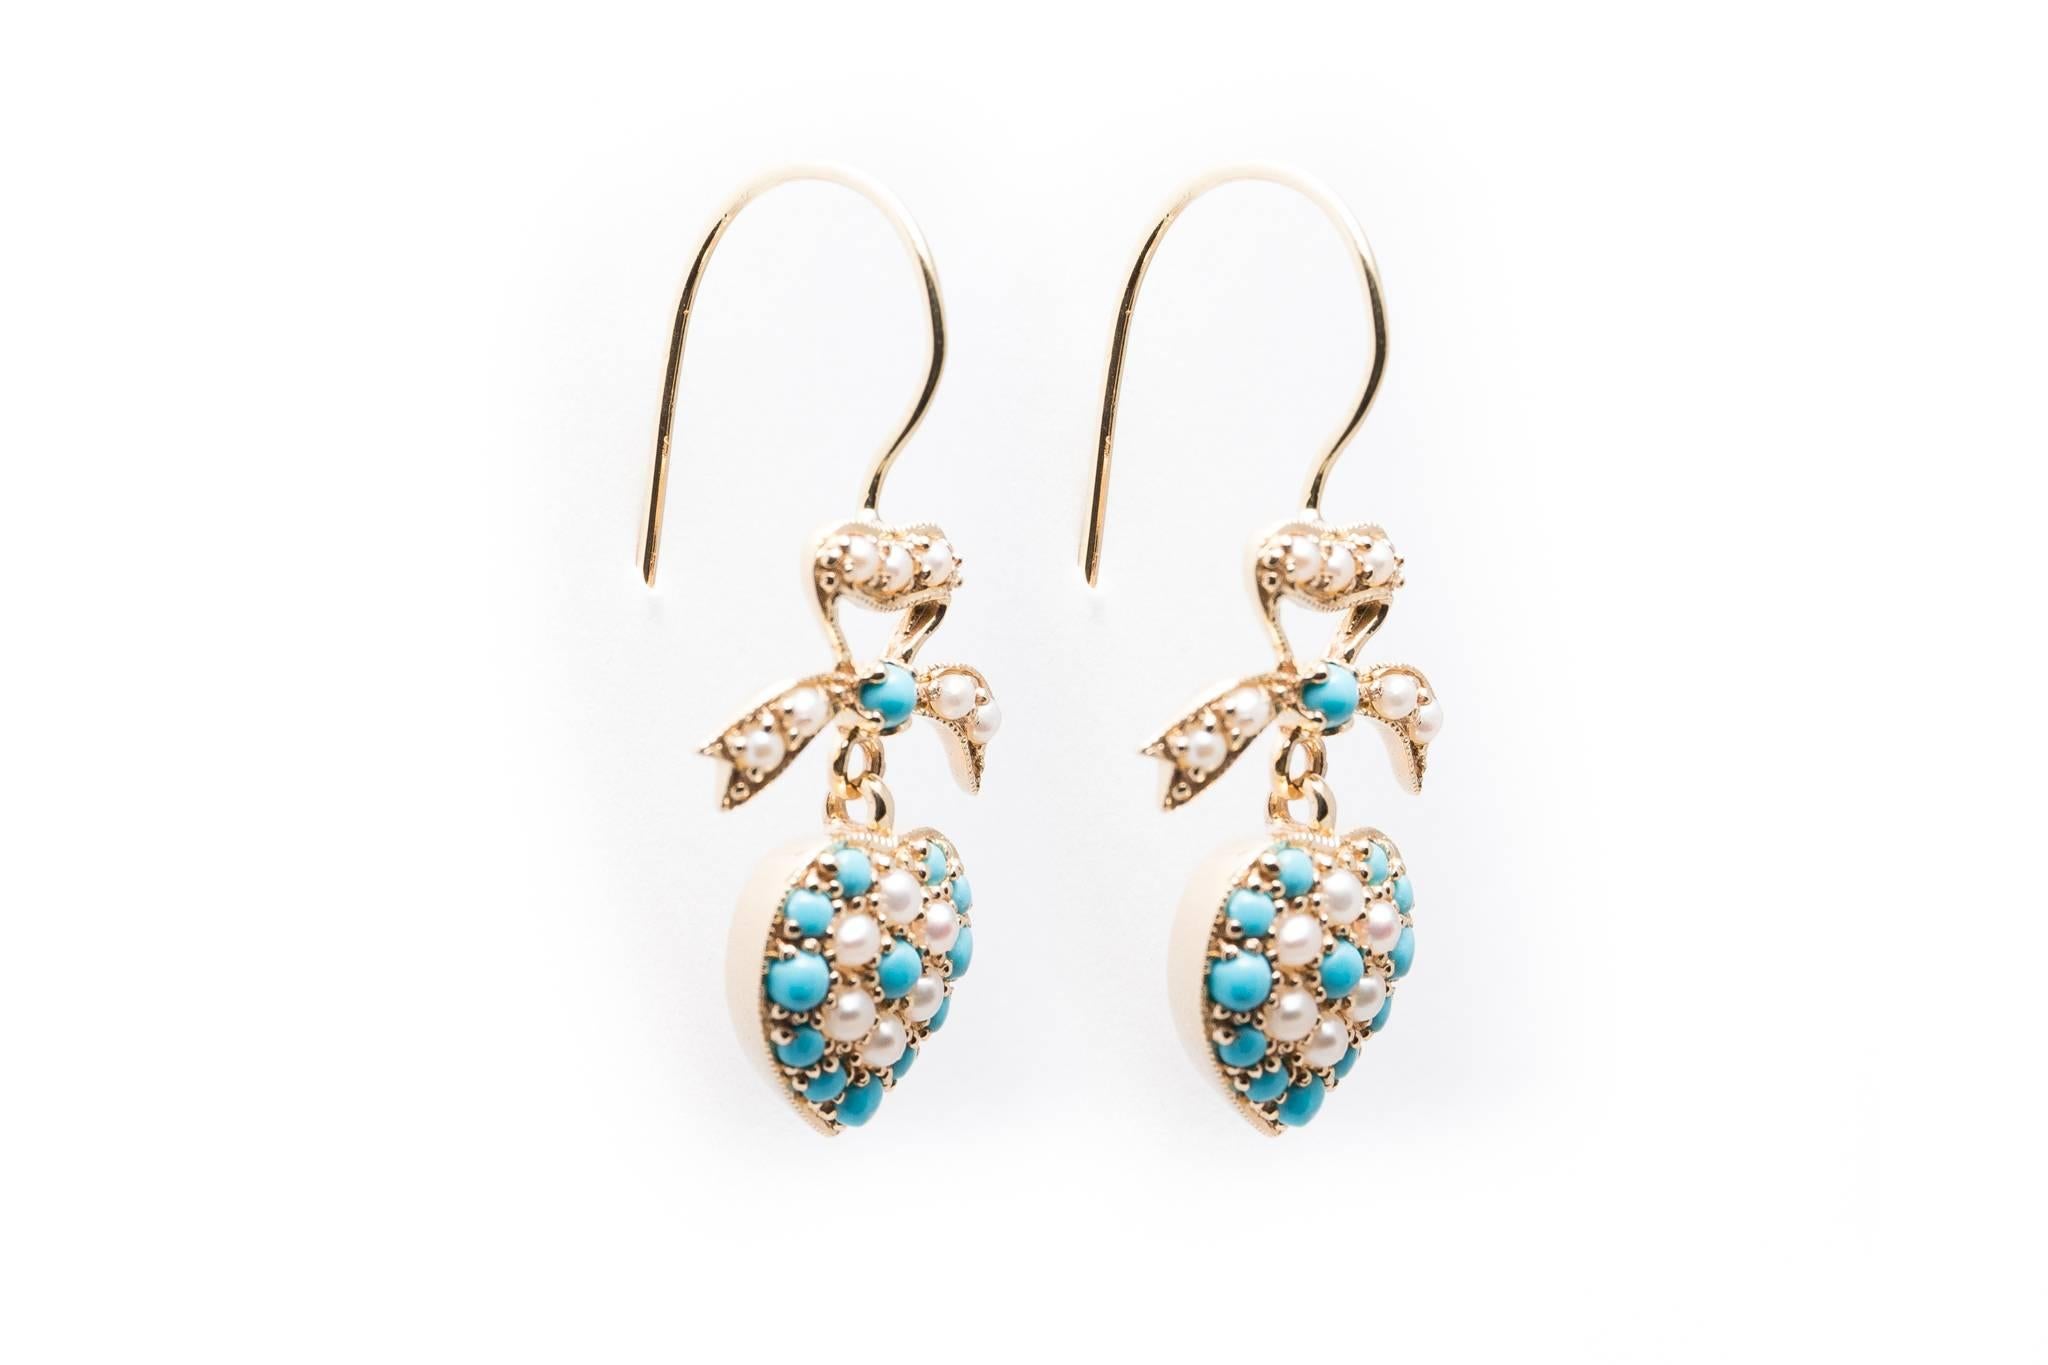 A beautiful pair of handmade dangling earrings in yellow gold.  Featuring a pearl set ribbon on the top, these earrings feature a pair of beautiful handcrafted yellow gold pearl and turquoise set hearts.

In excellent condition, these earrings